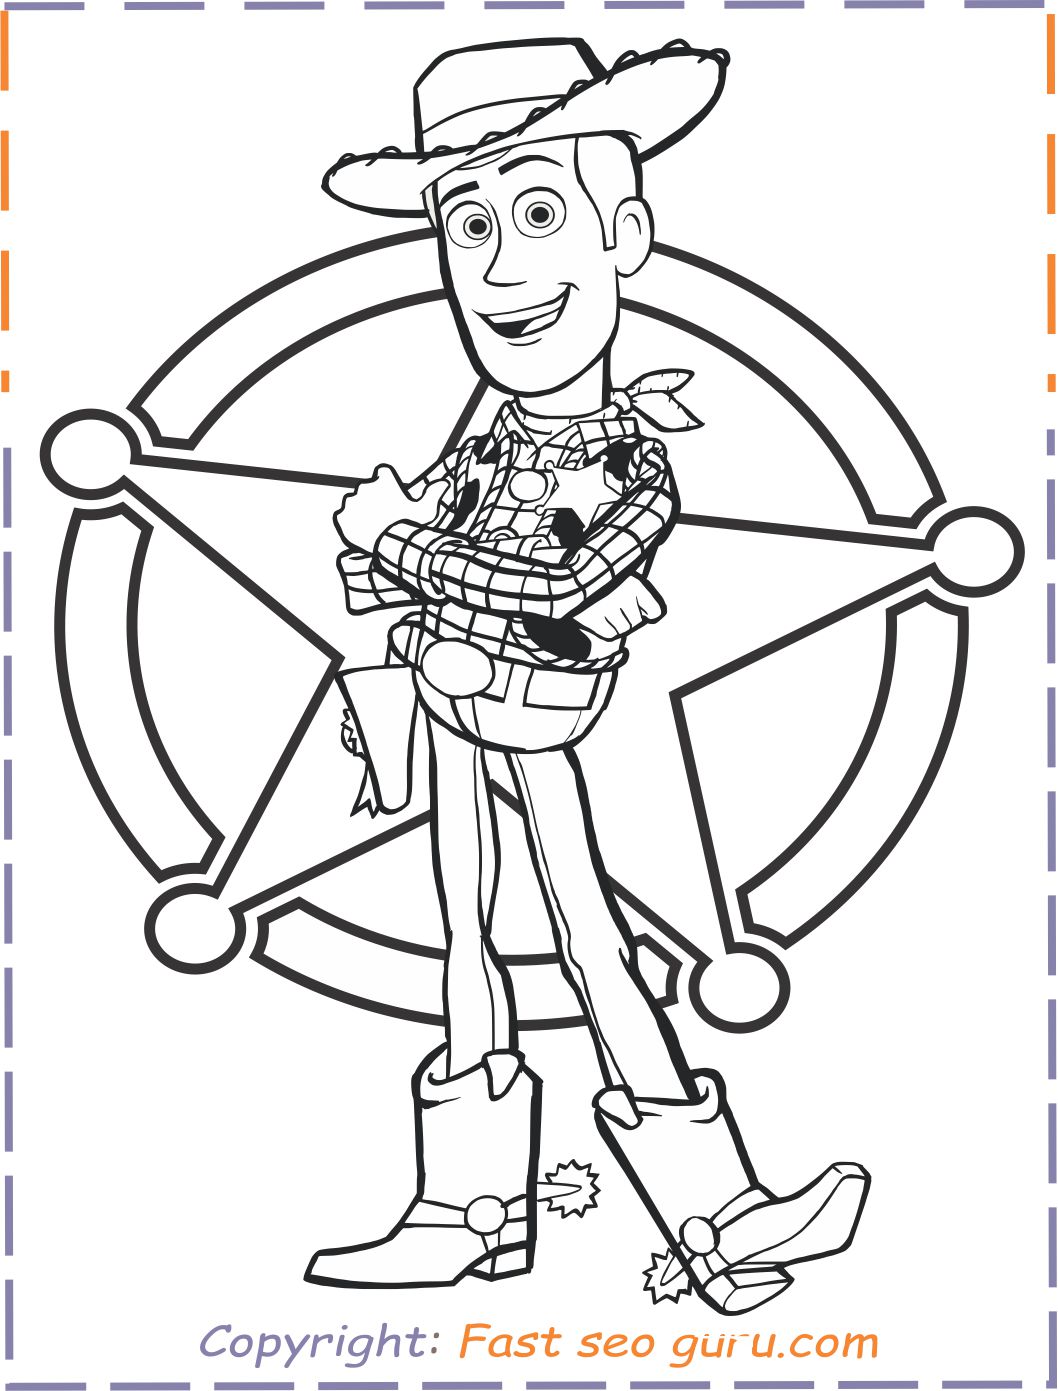 free-kids-coloring-pages-printable